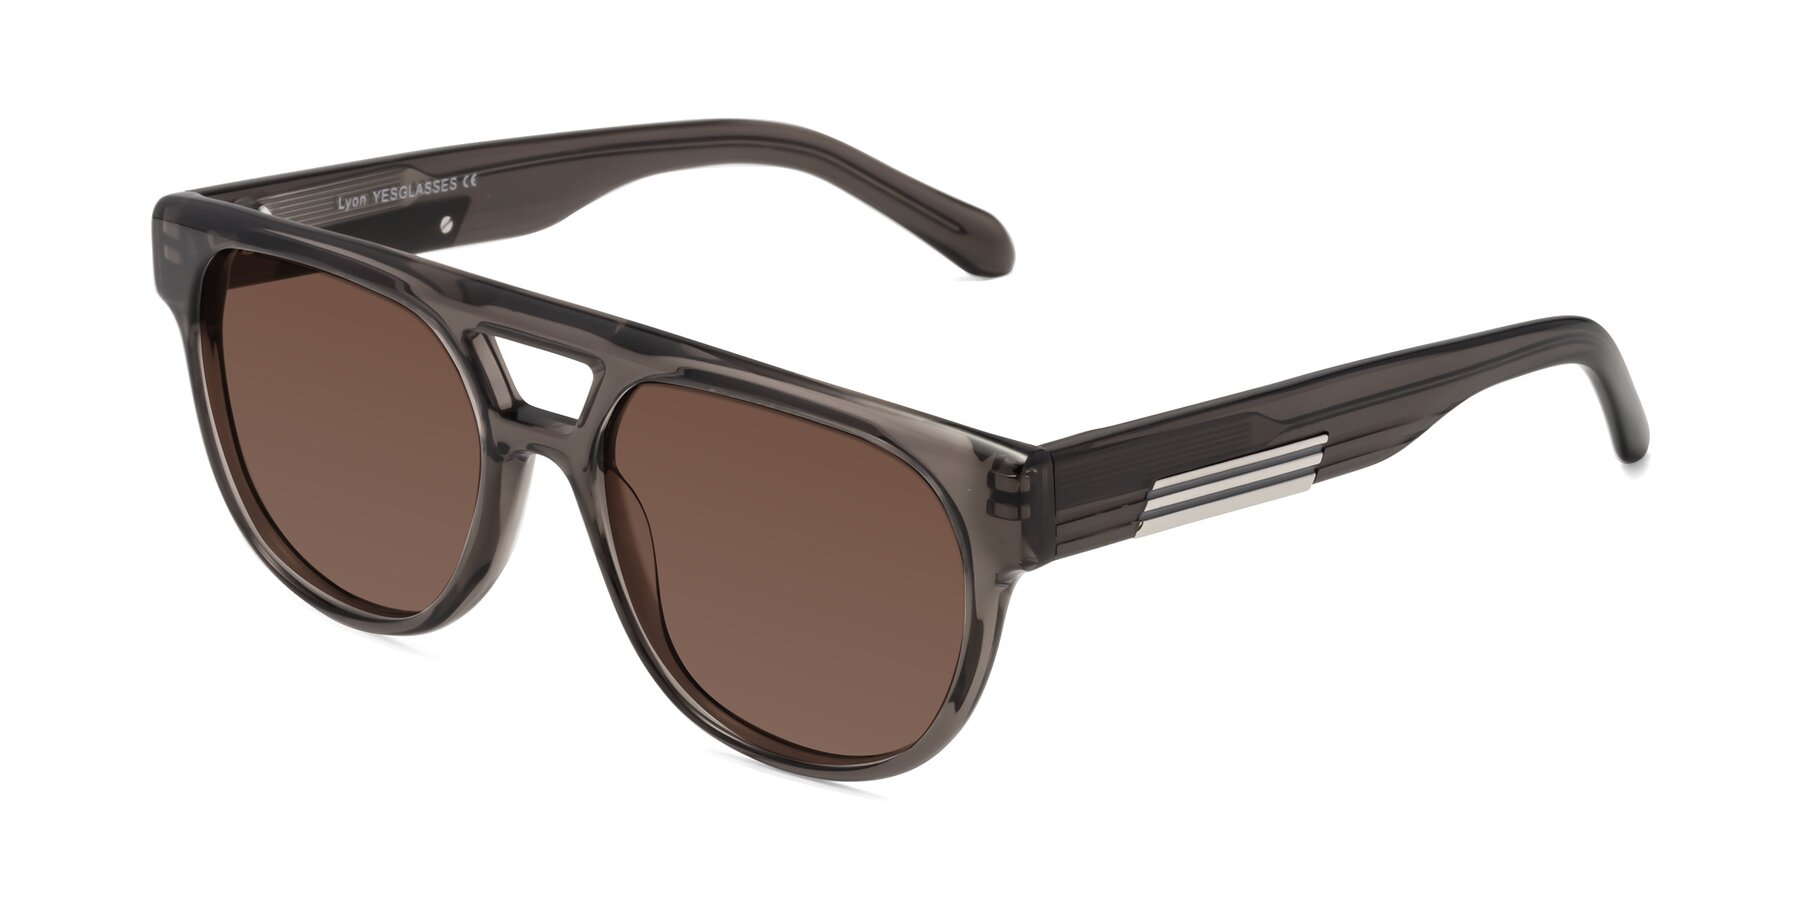 Angle of Lyon in Charcoal Gray with Brown Tinted Lenses